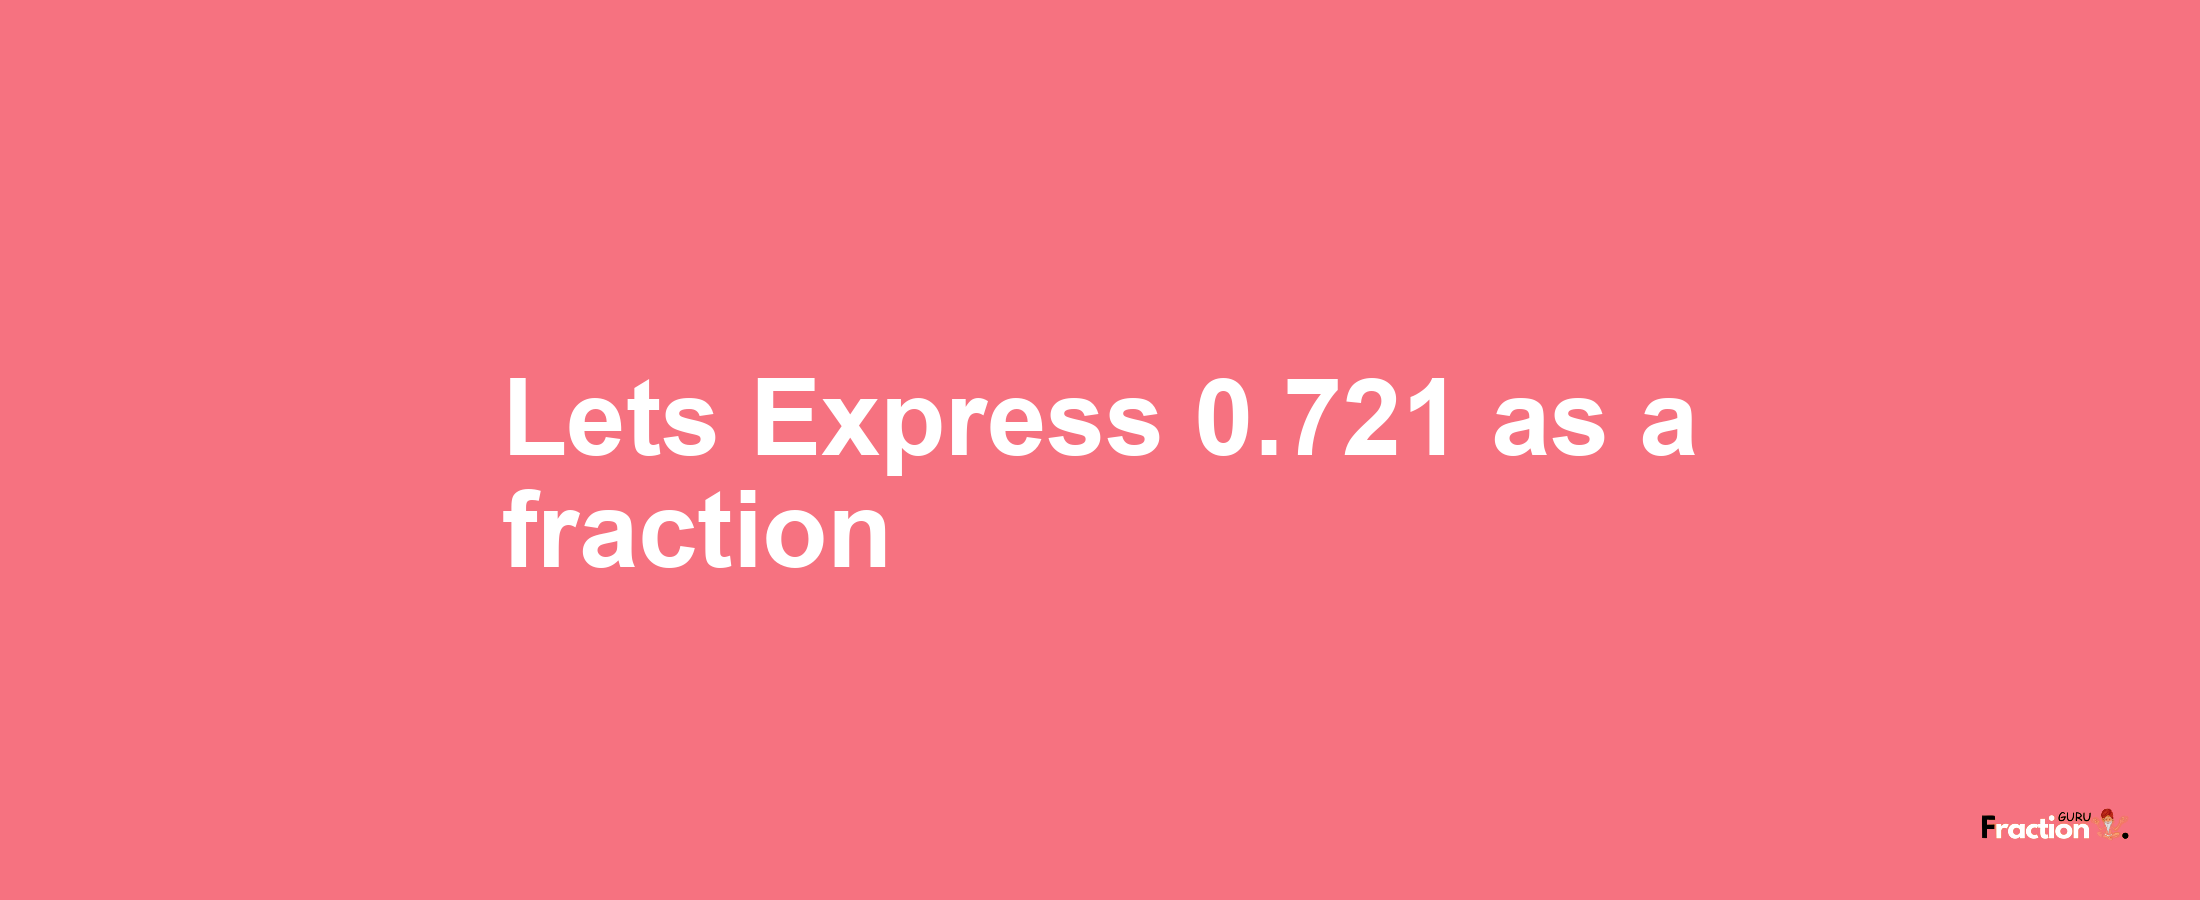 Lets Express 0.721 as afraction